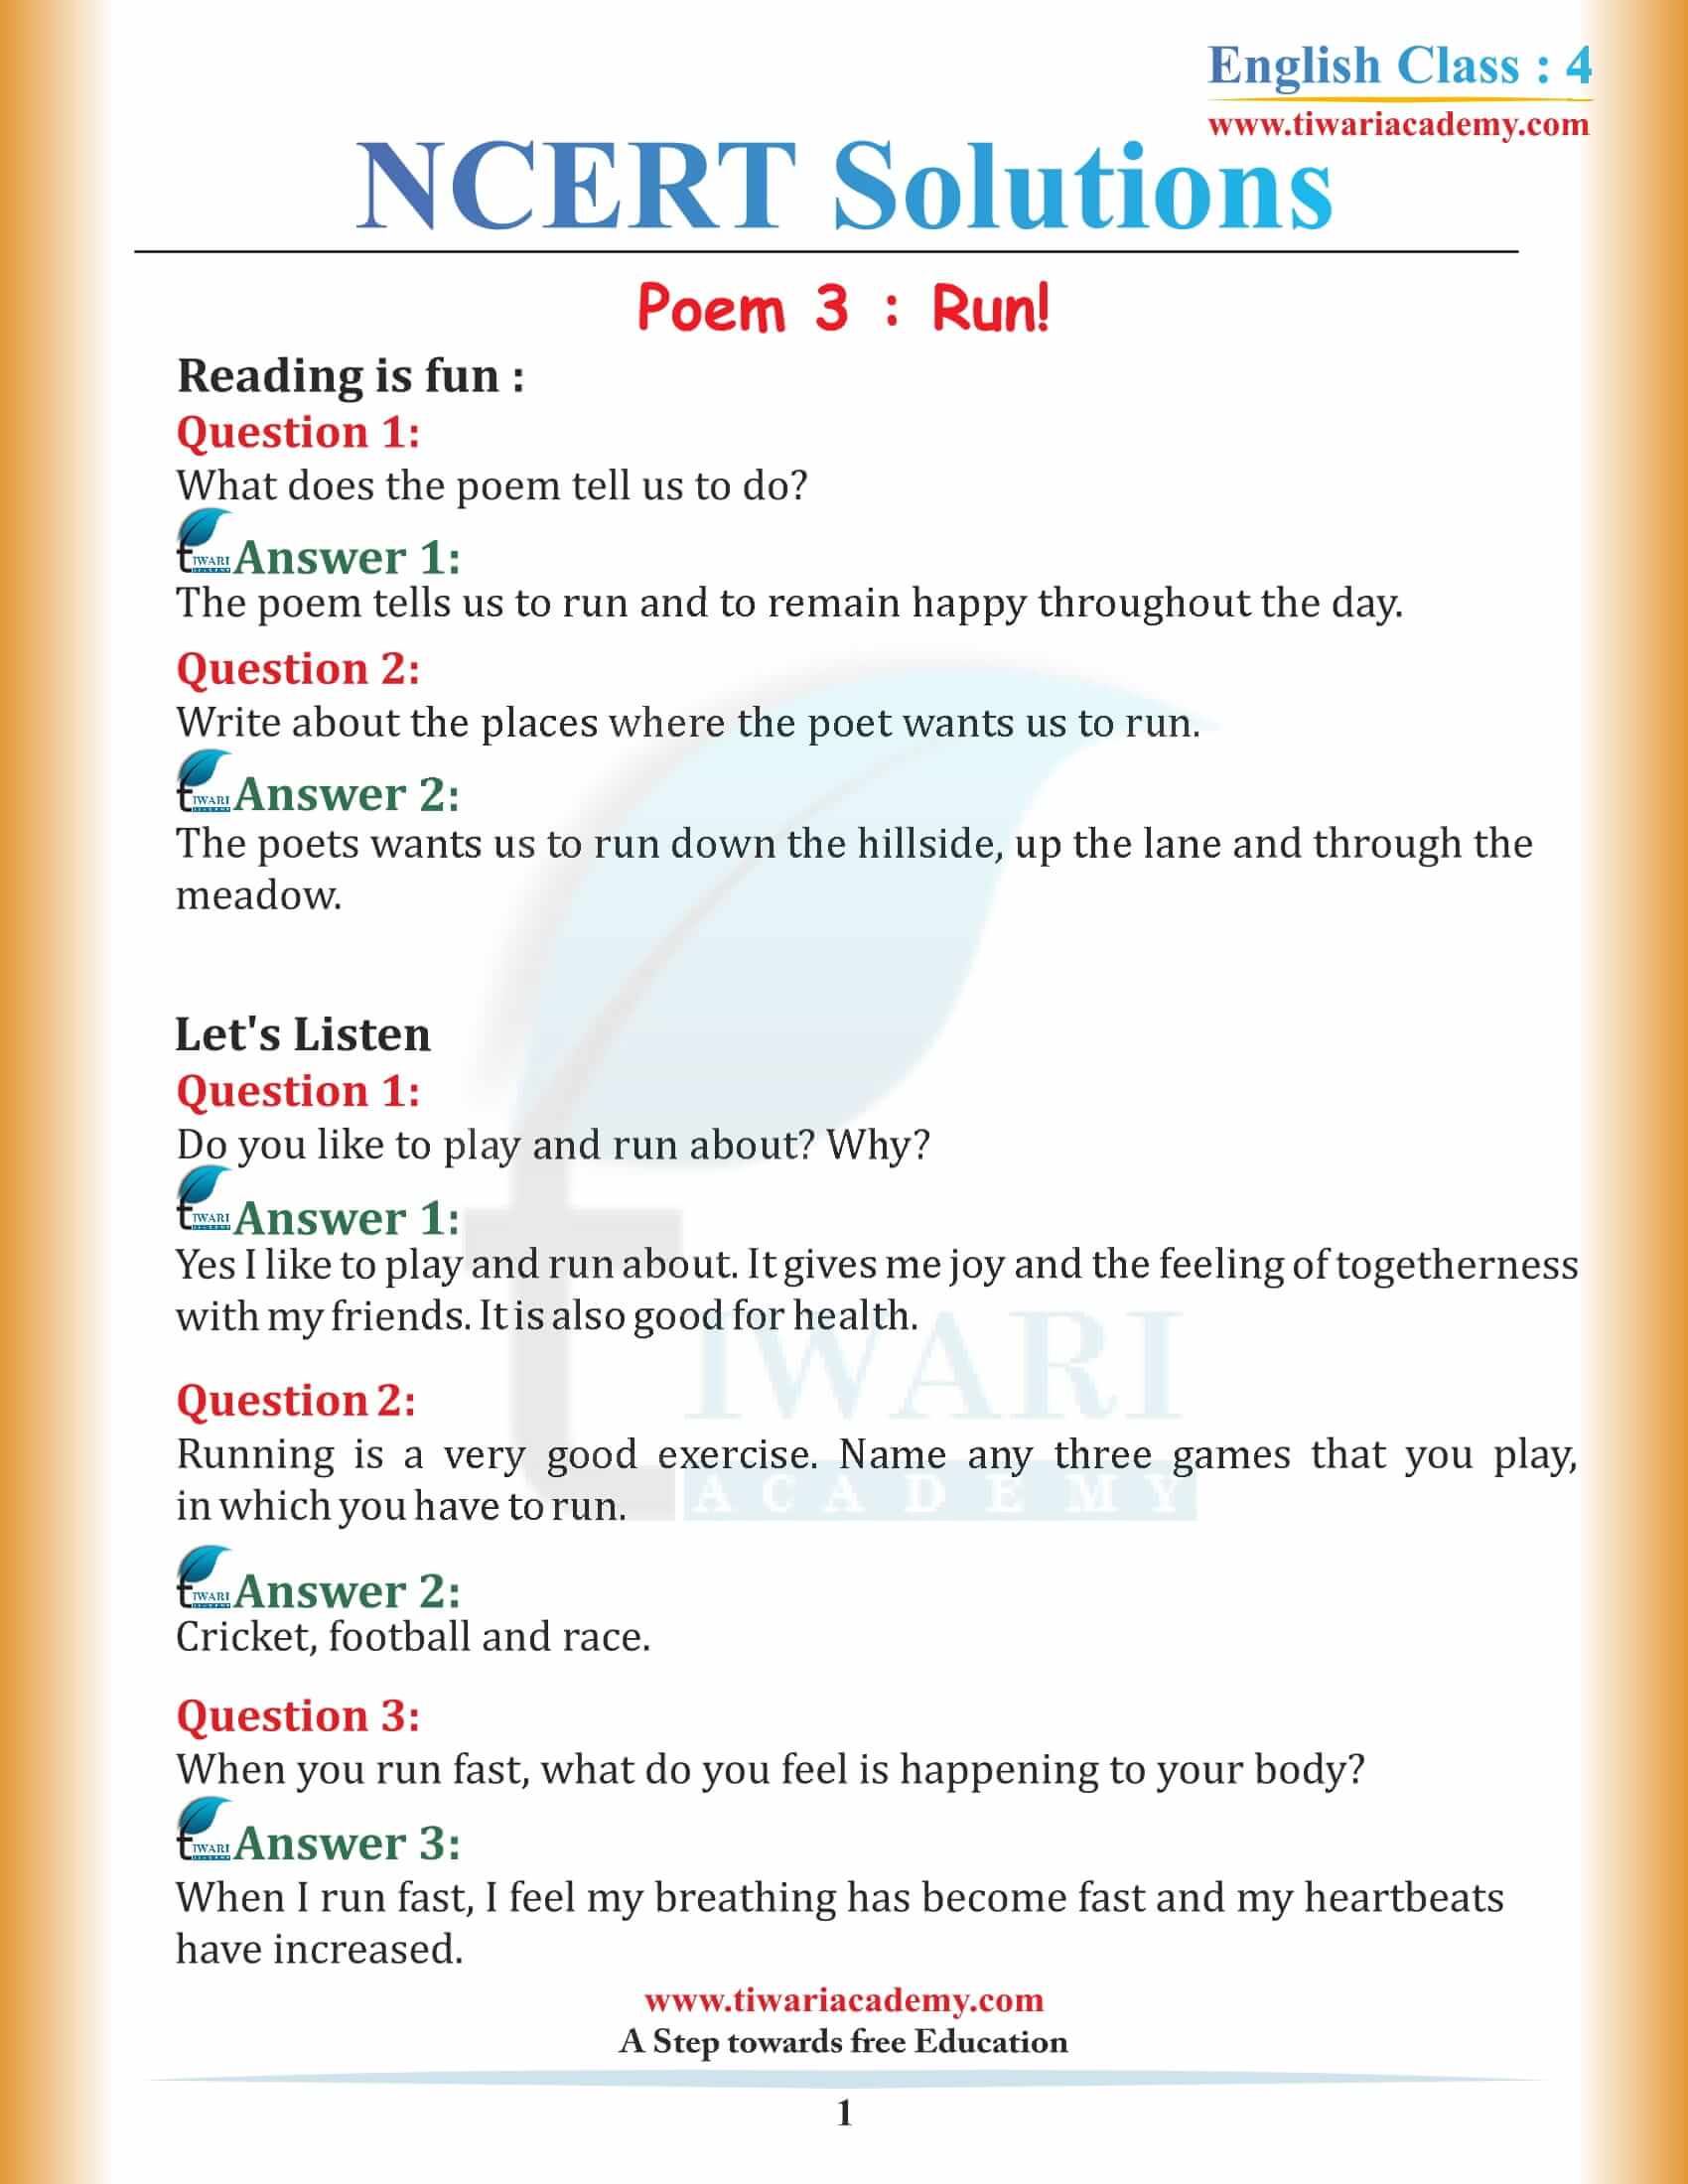 NCERT Solutions for Class 4 English Unit 3 Chapter 1 Run